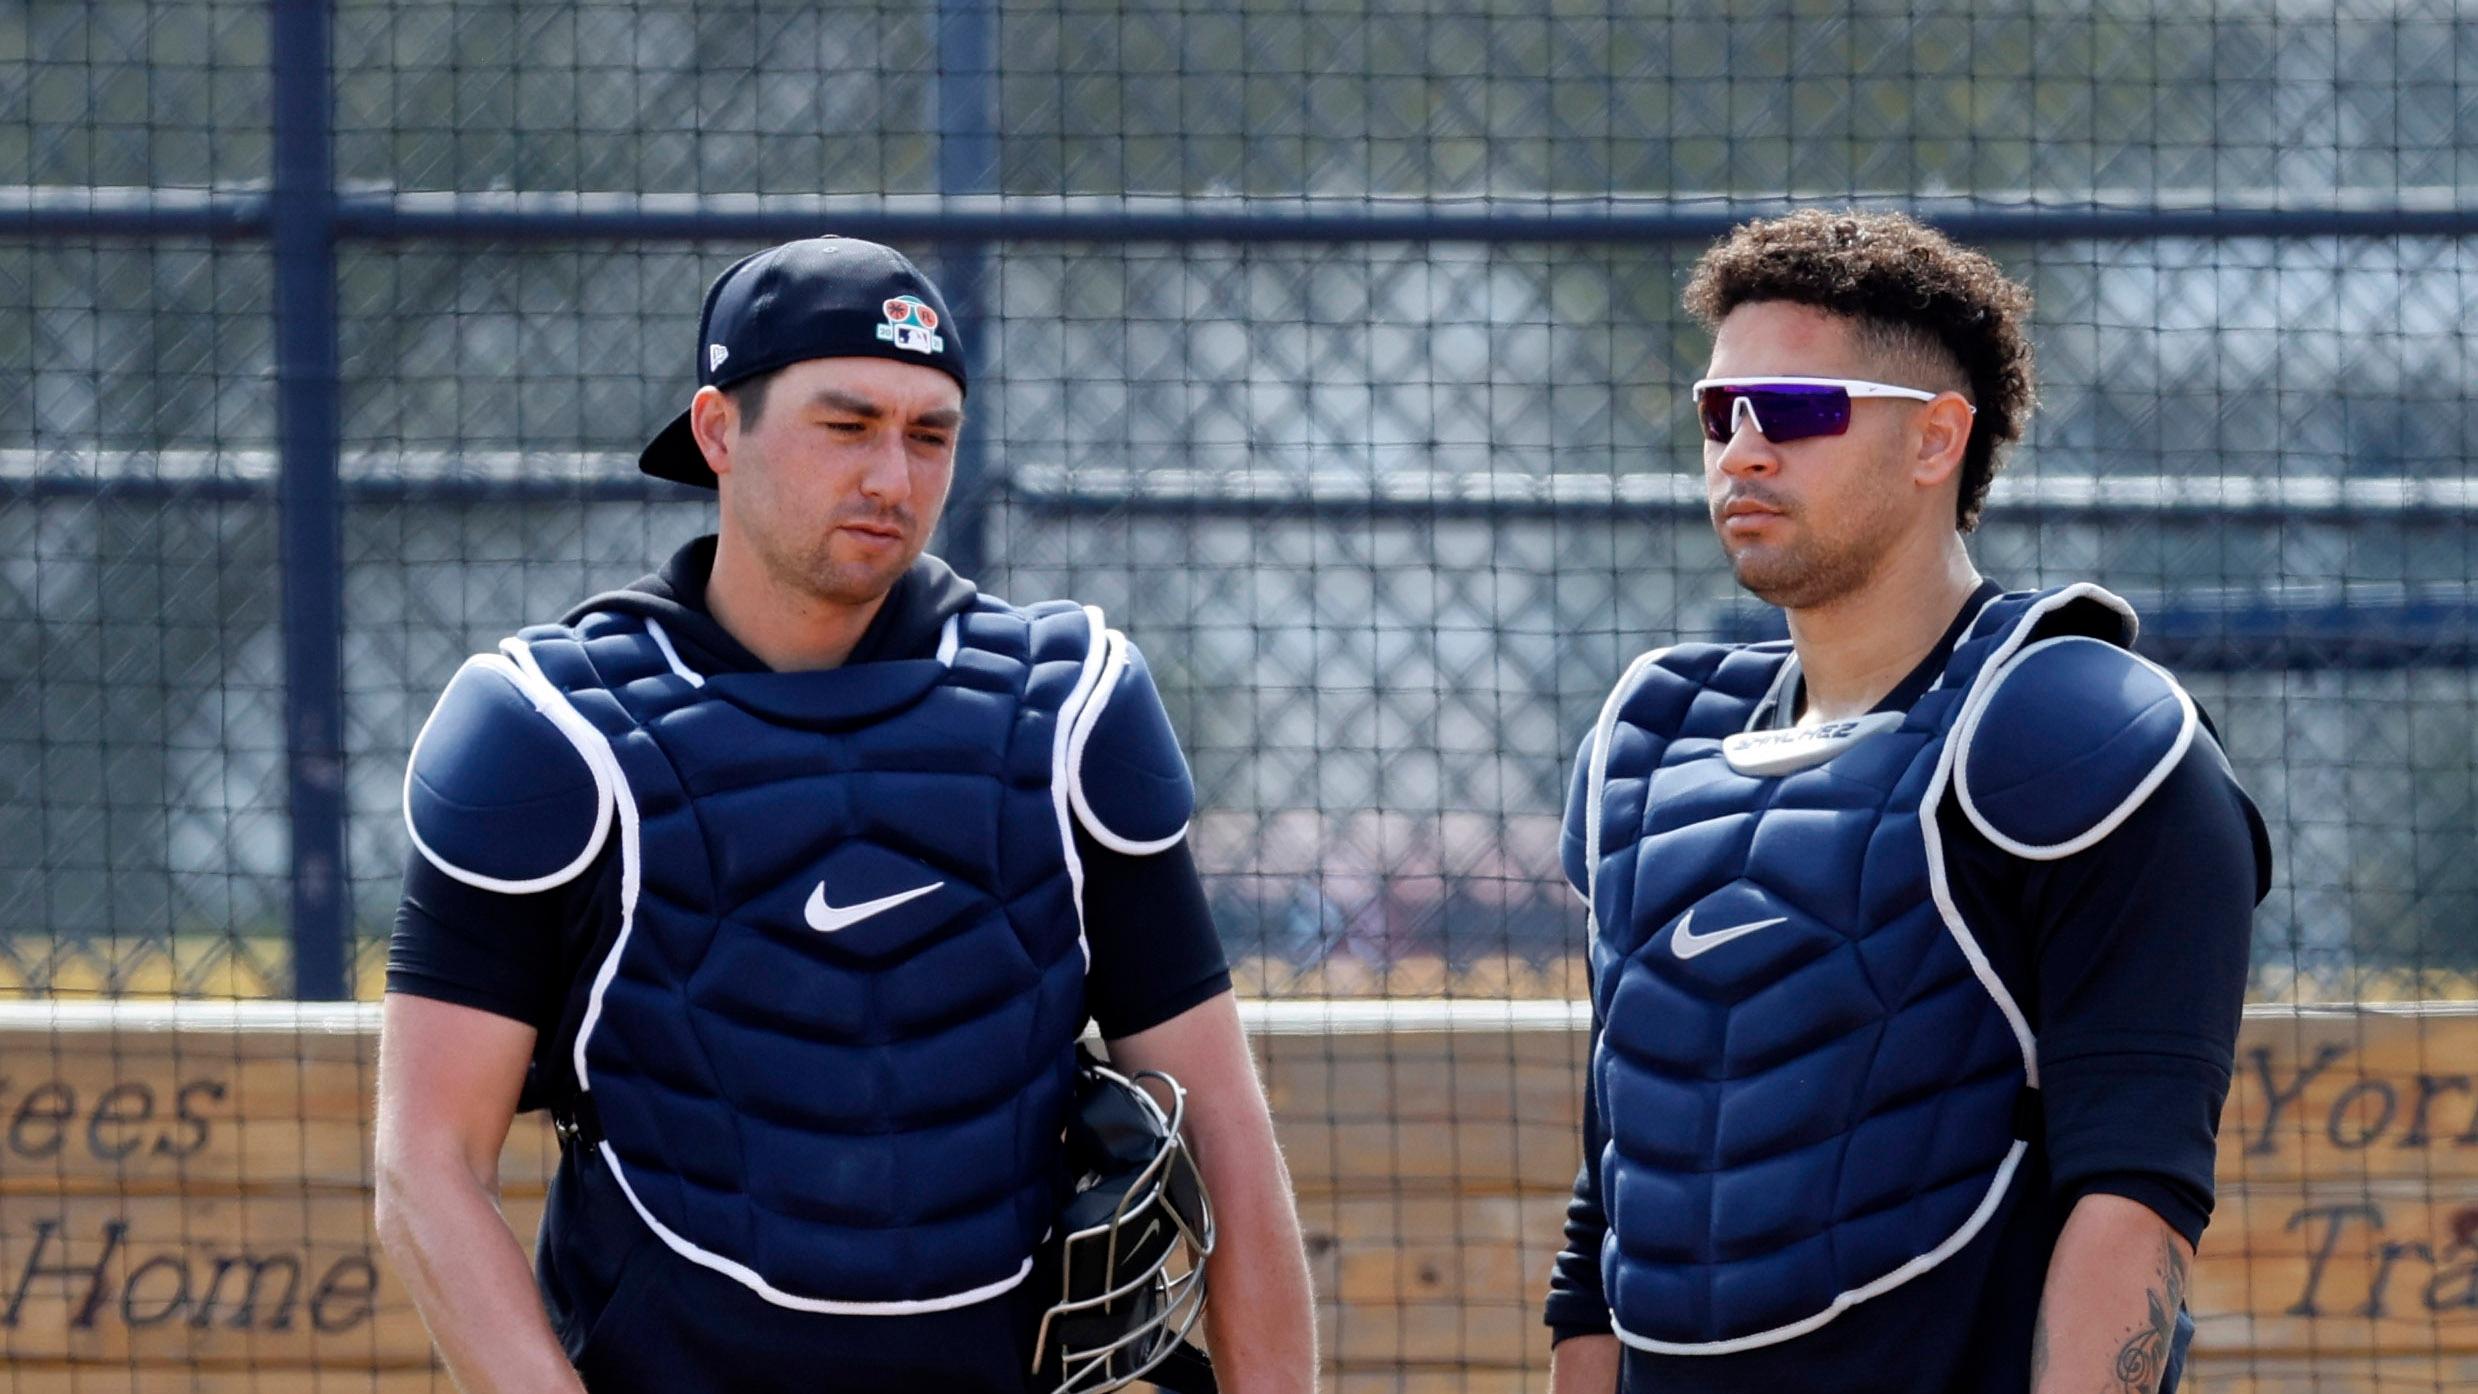 New York Yankees catcher Kyle Higashioka (66) and New York Yankees catcher Gary Sanchez (24) talk during spring training at the Yankees player development complex. / Kim Klement-USA TODAY Sports